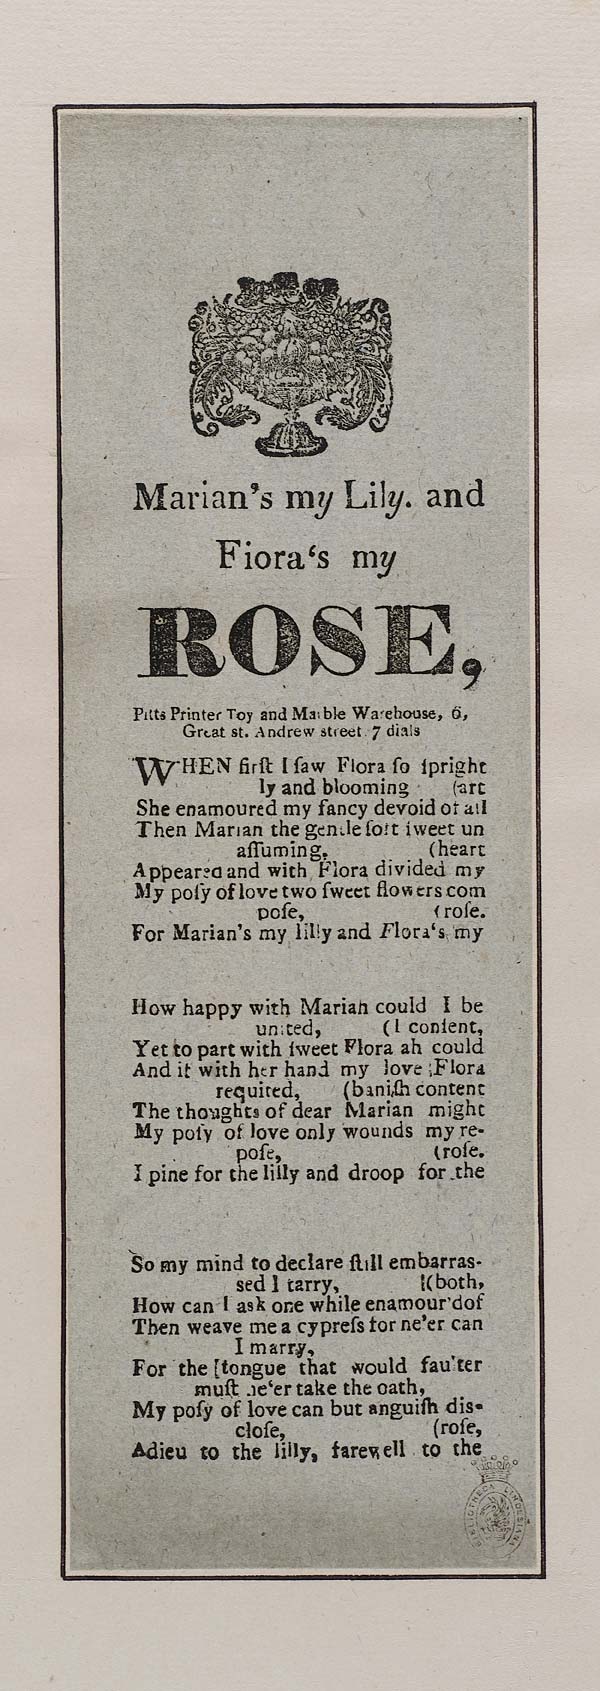 (325) Marian's my lily and Fiora's [sic] my rose